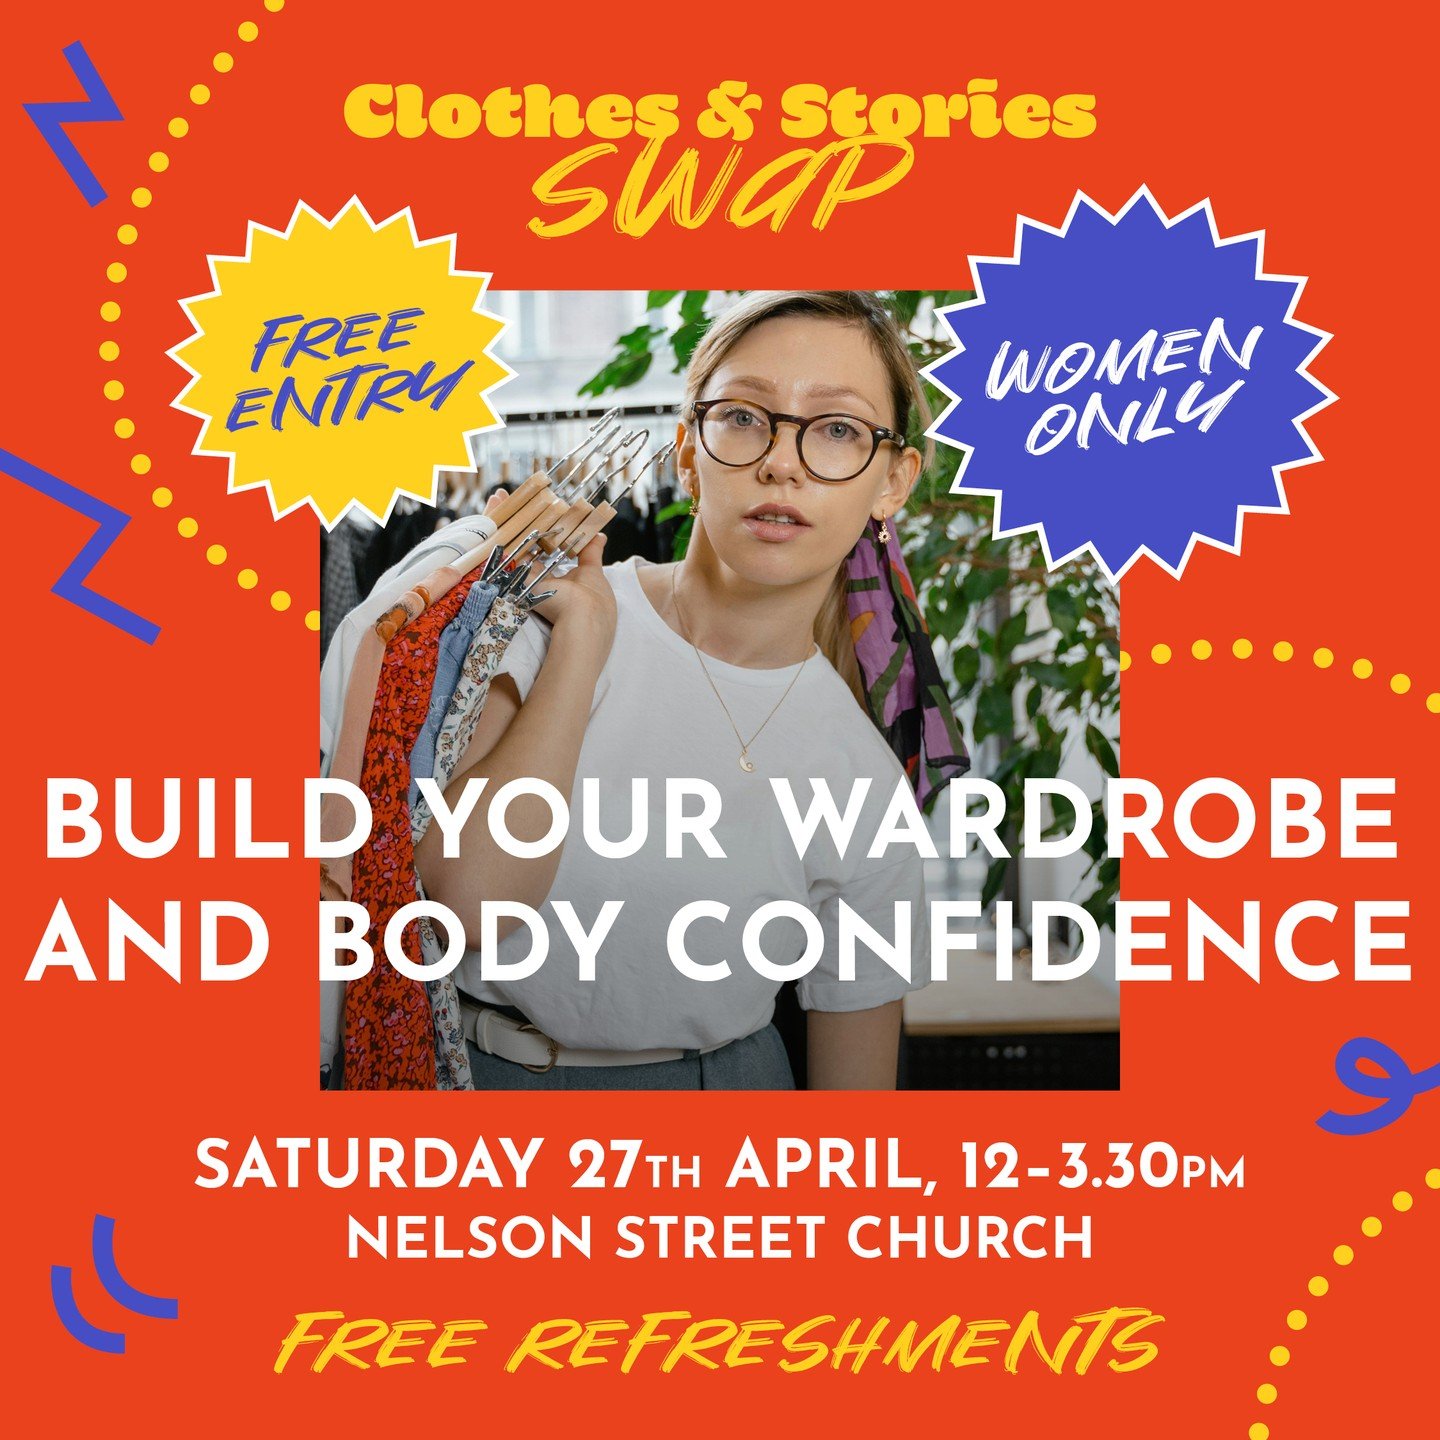 Come and join us for an afternoon of sharing &ndash; clothing, tales about our favourite outfits, good company, food and lots of tea and cake.

Saturday 27th April, 12&ndash;3.30pm, Nelson Street Church, Rochdale.

Everybody who comes gets 1 token fo